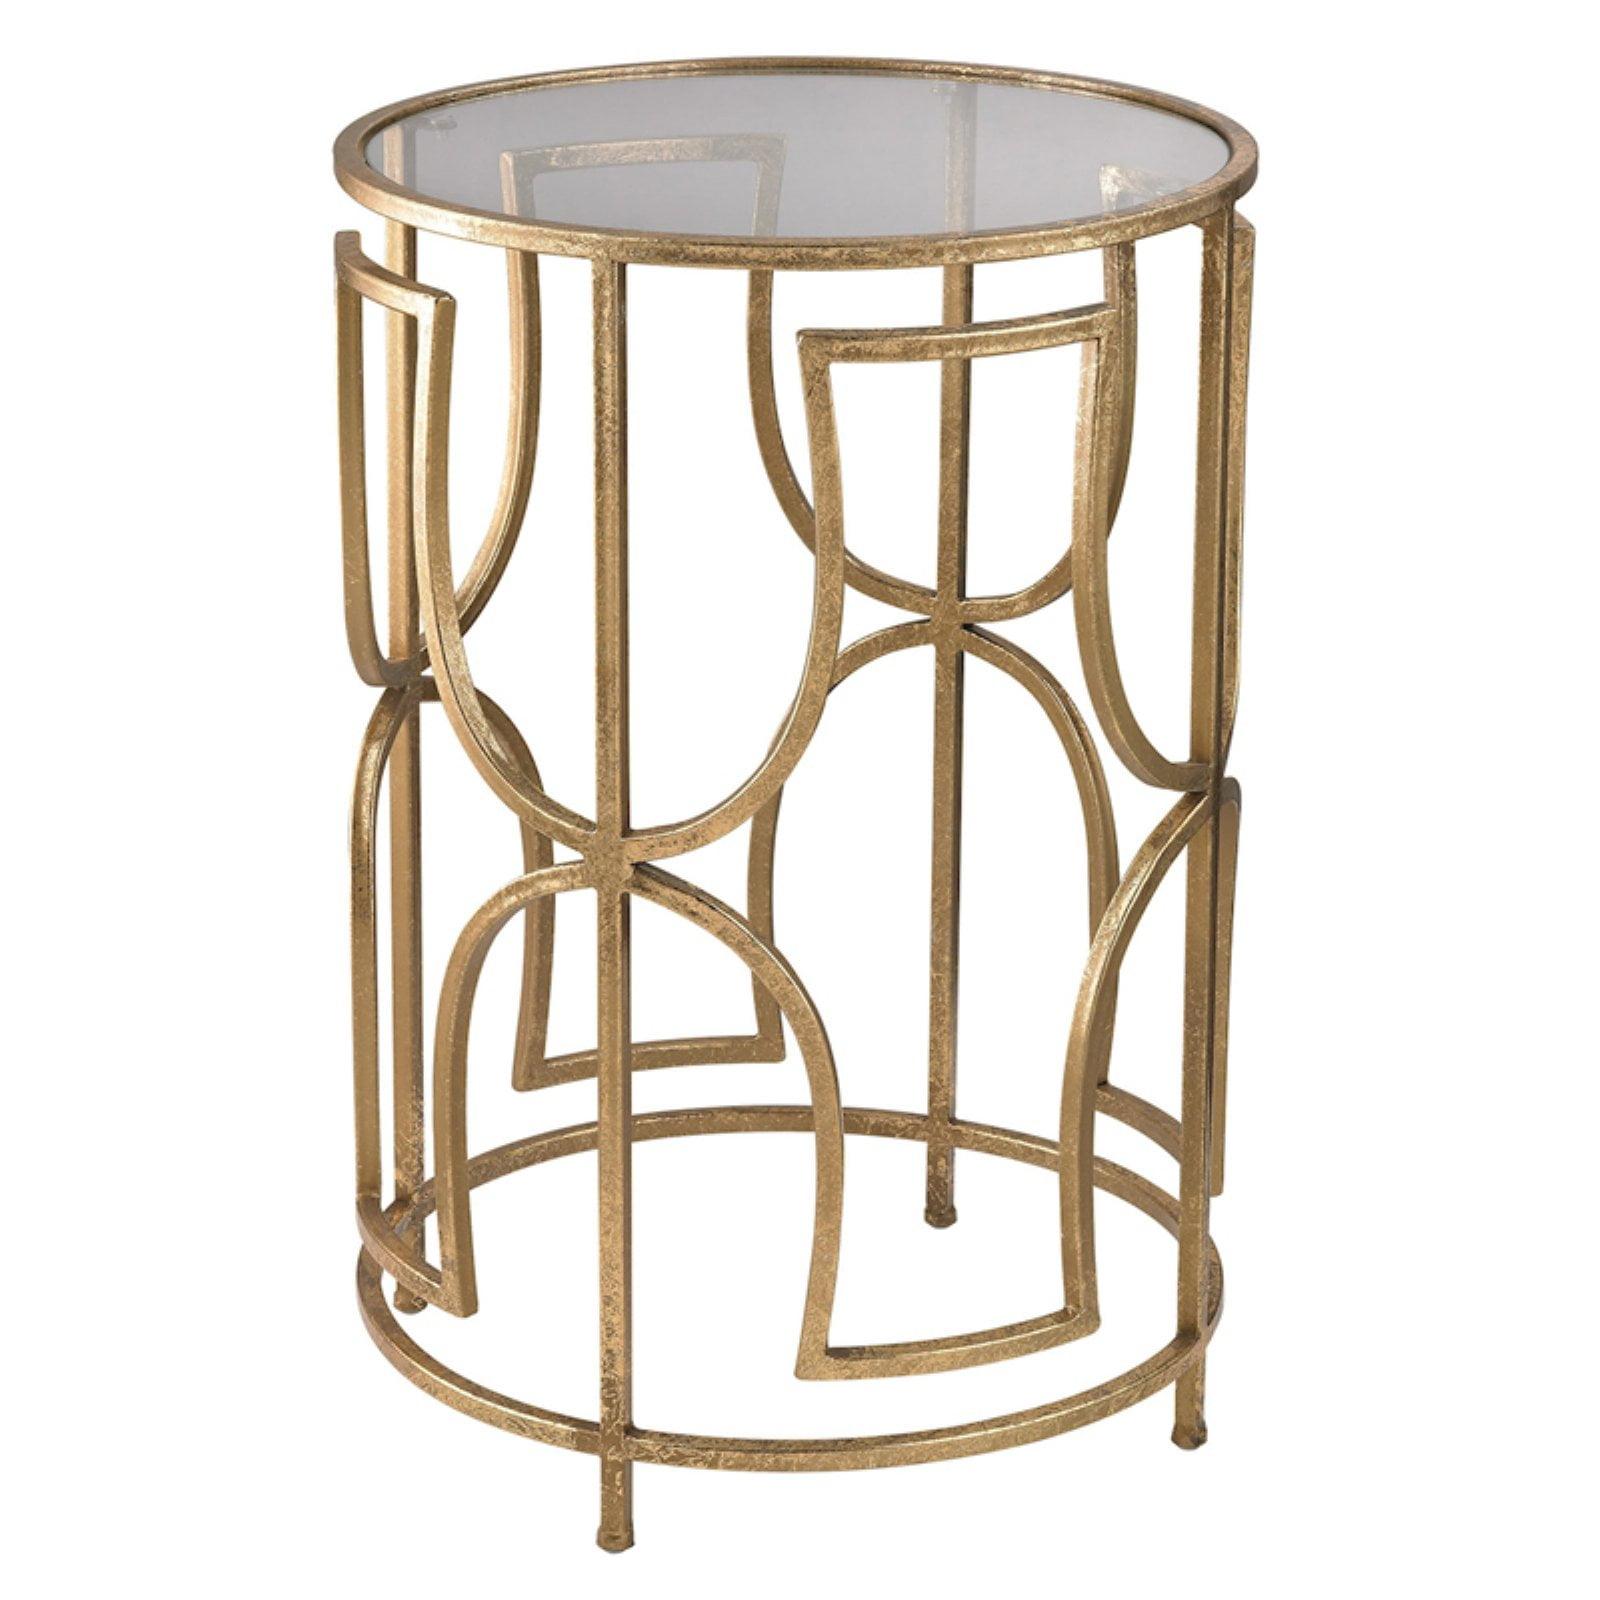 Antique Gold Round Metal Accent Table with Glass Top